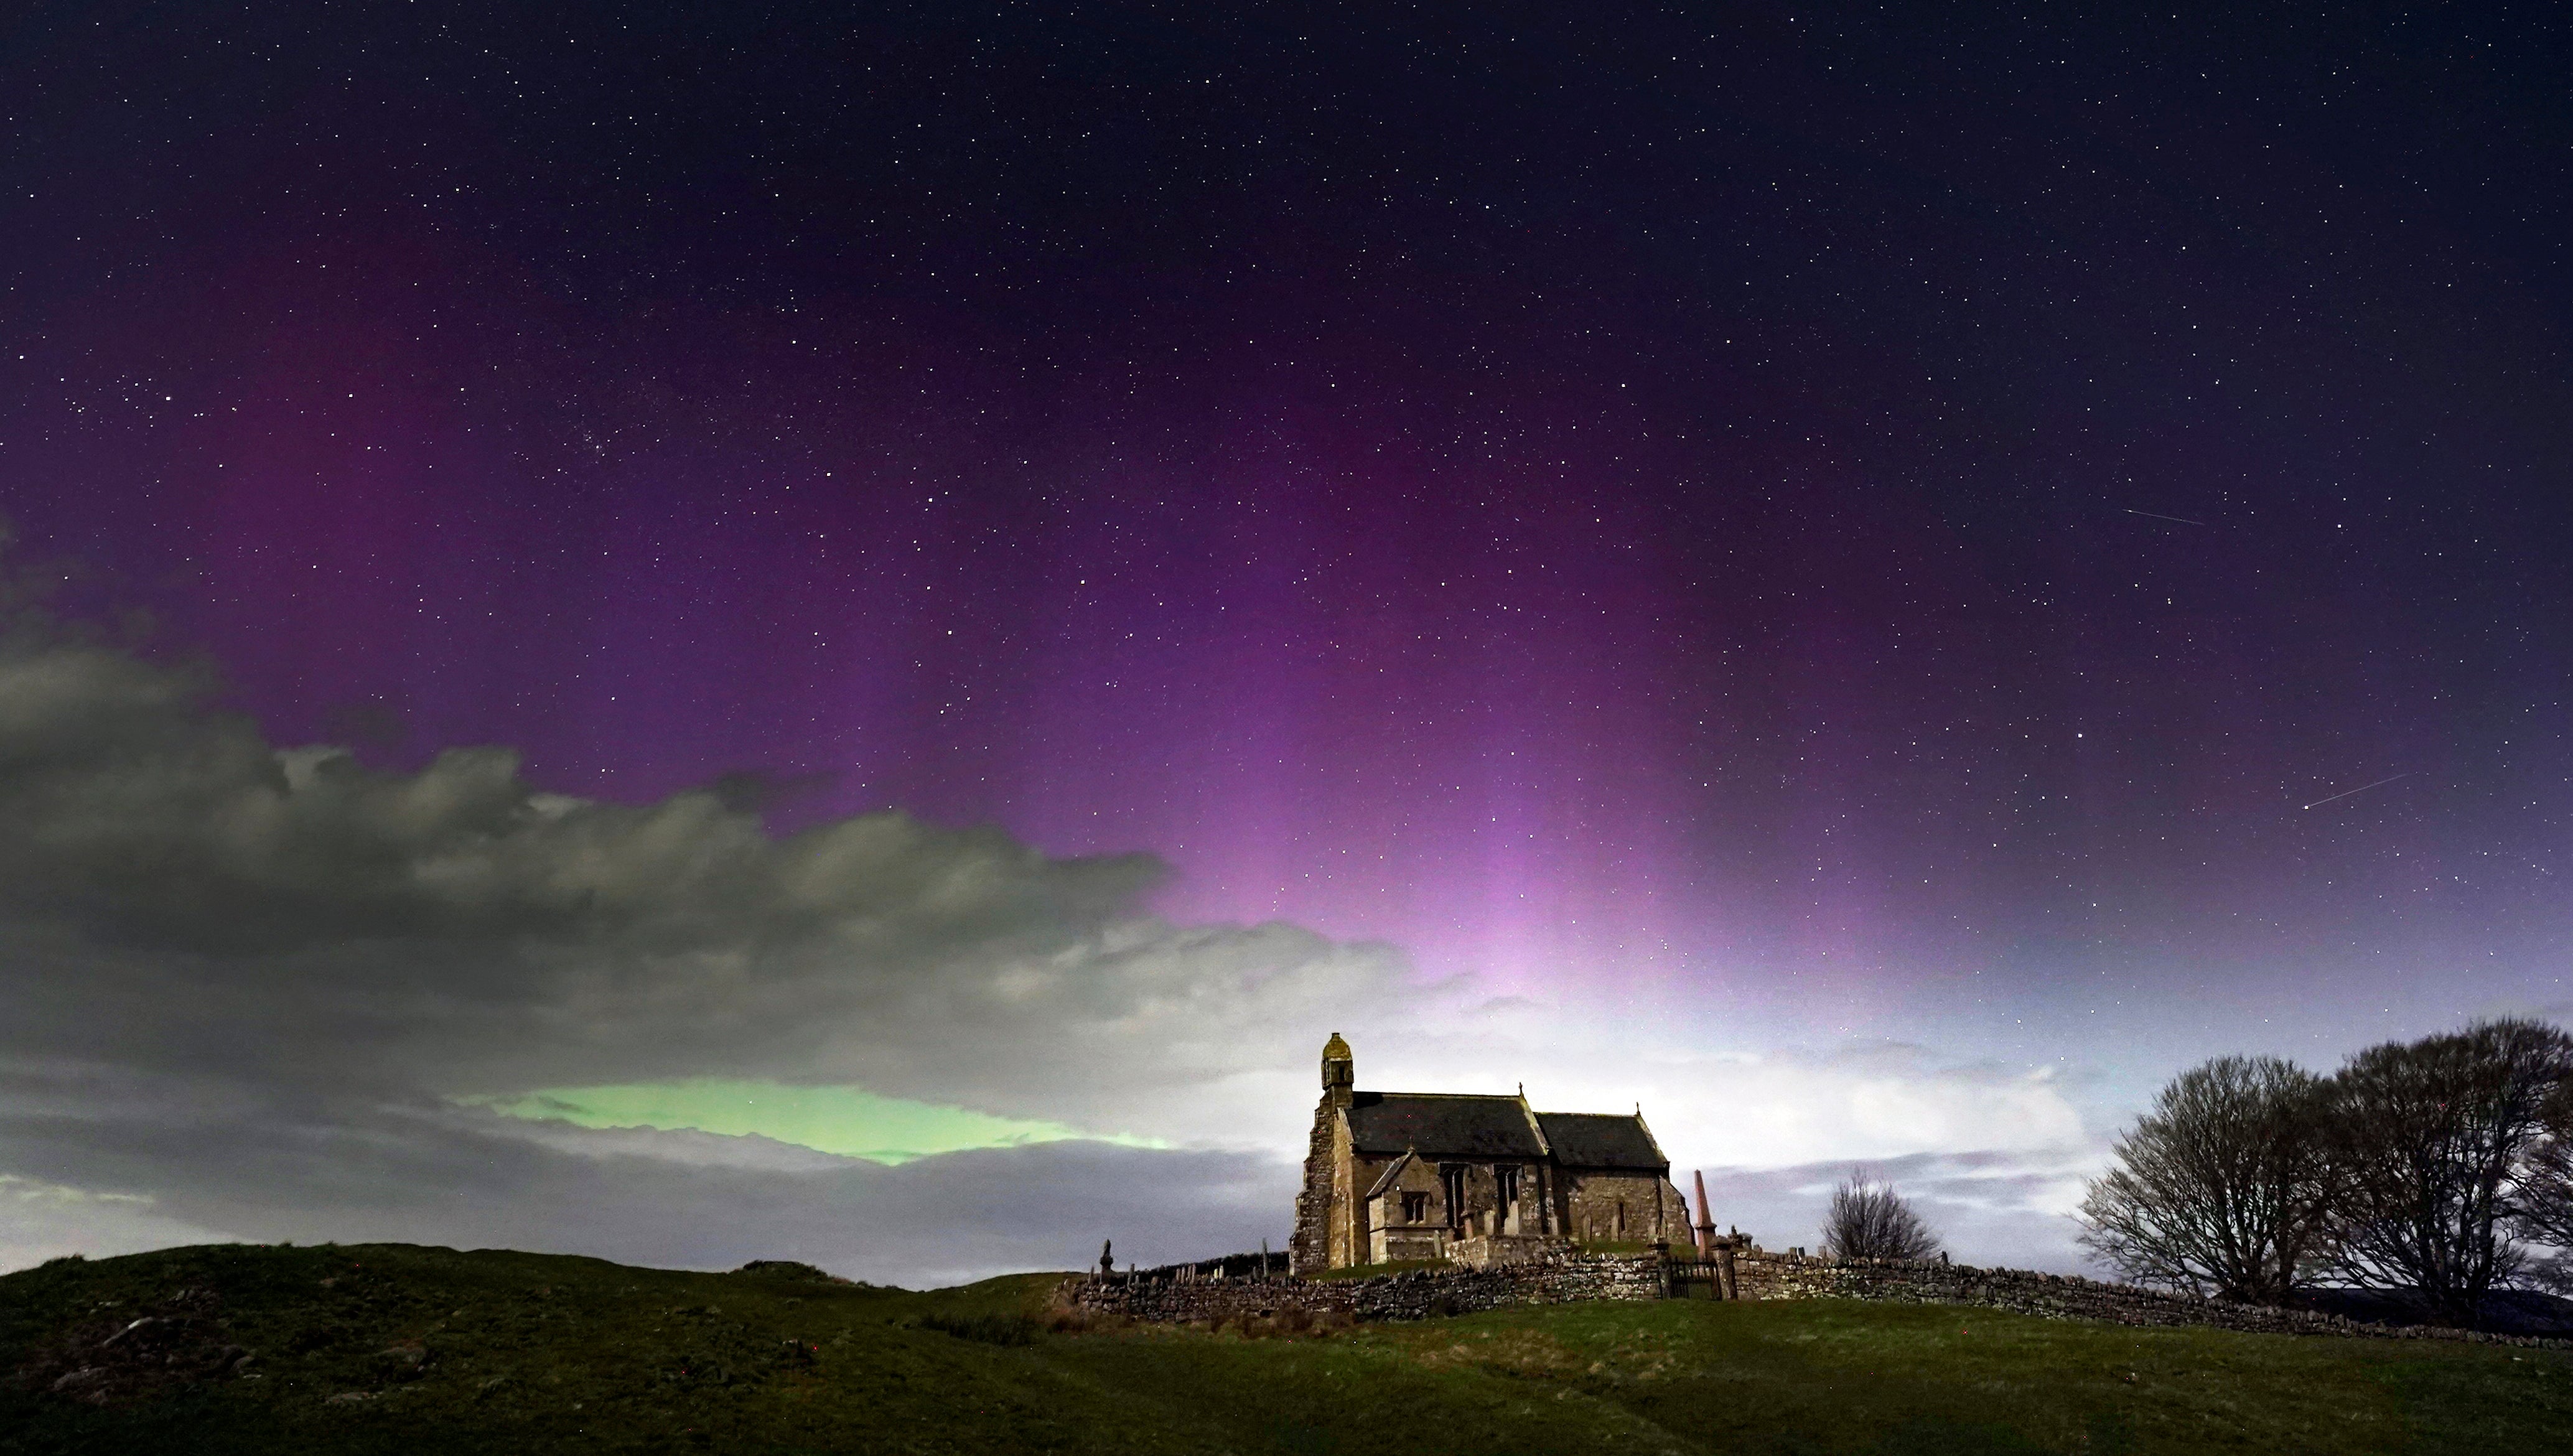 The aurora borealis, also known as the Northern Lights, illuminate the sky just before midnight over St Aidan's church in Thockrington, Northumberland